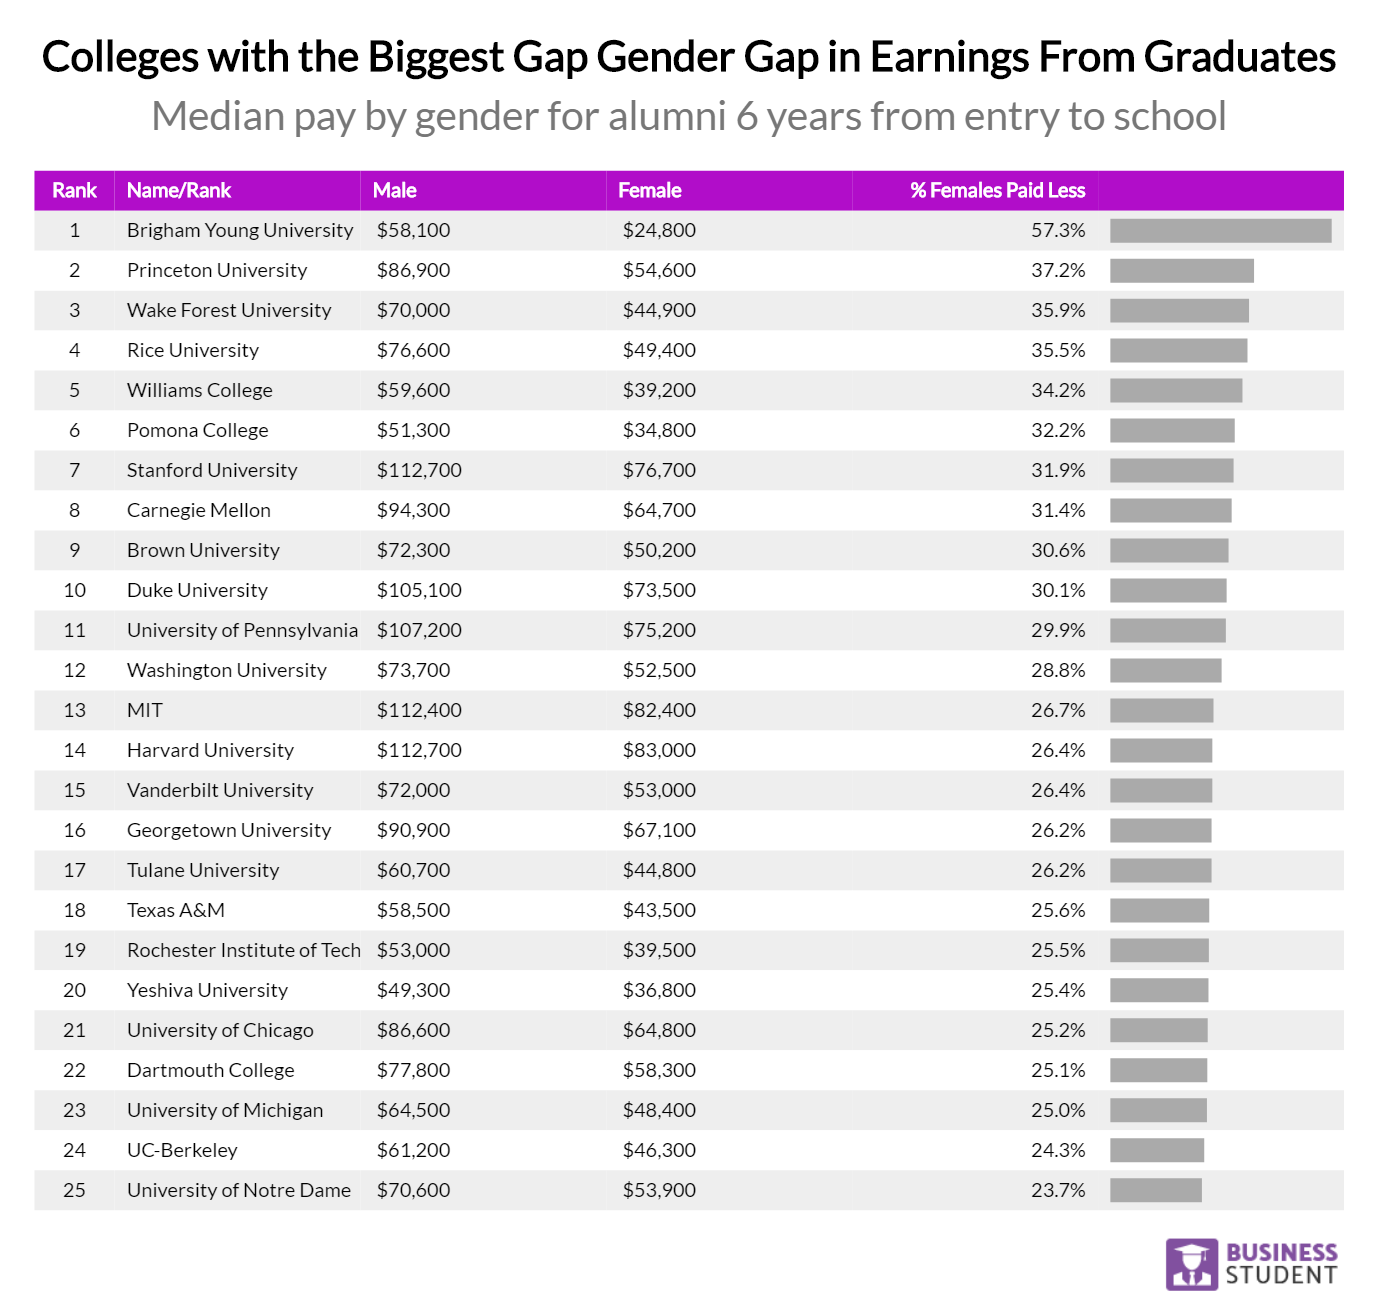 colleges with the biggest gap gender gap in earnings from graduates 2018 12 04T22 00 11.981Z